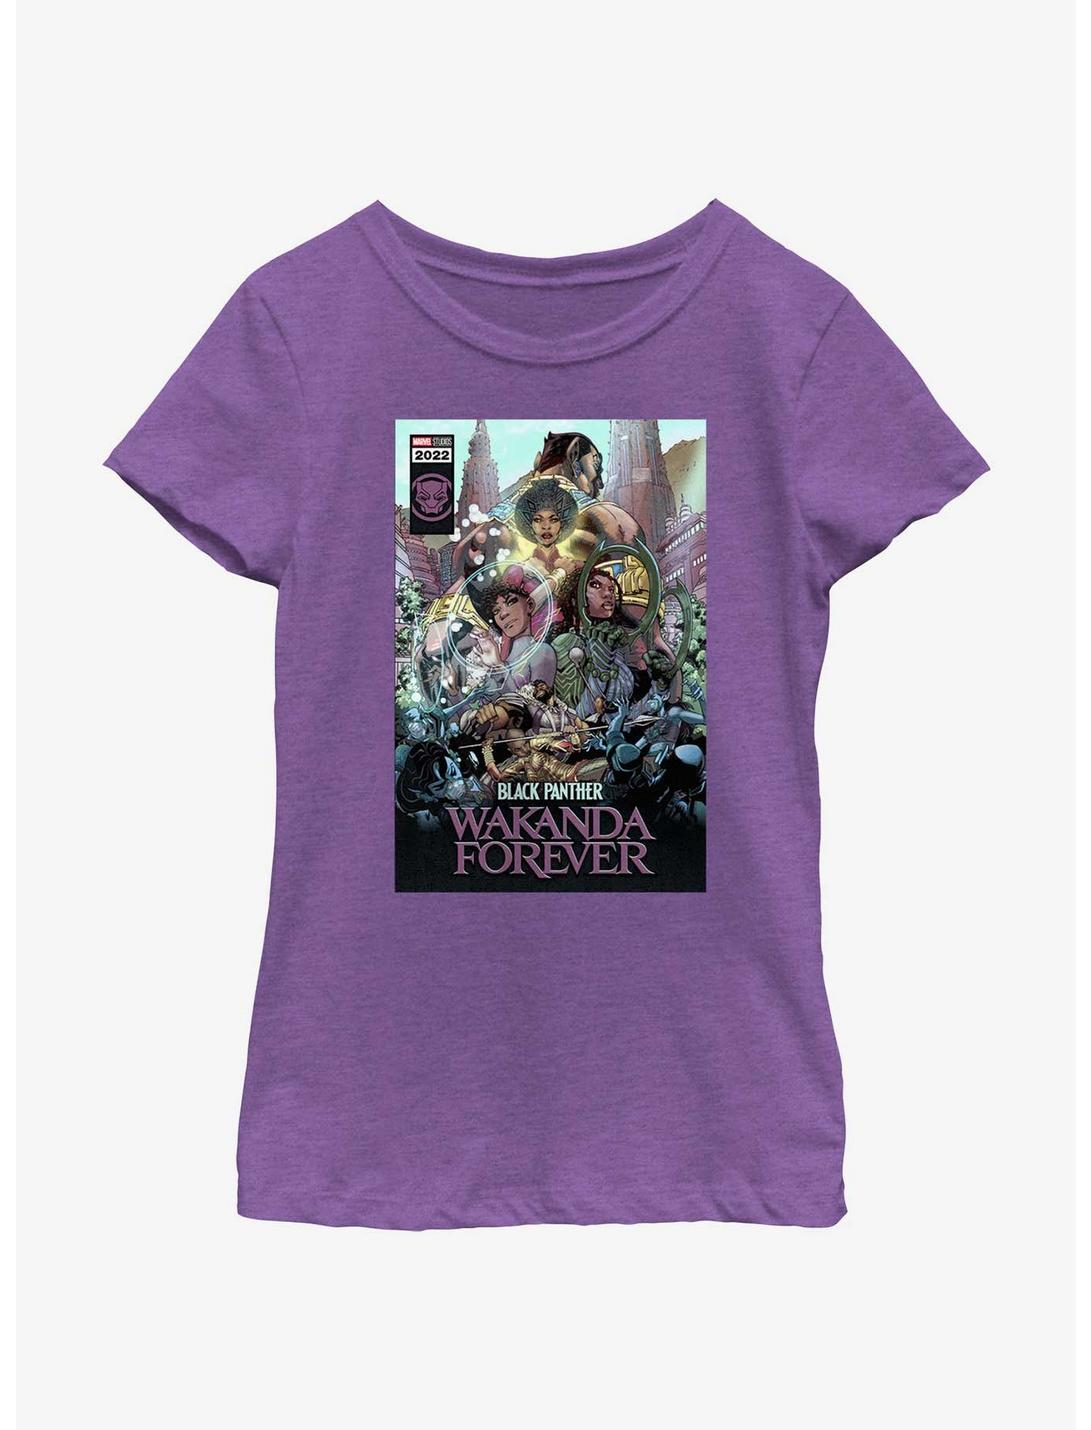 Marvel Black Panther: Wakanda Forever Comic Cover Youth Girls T-Shirt, PURPLE BERRY, hi-res